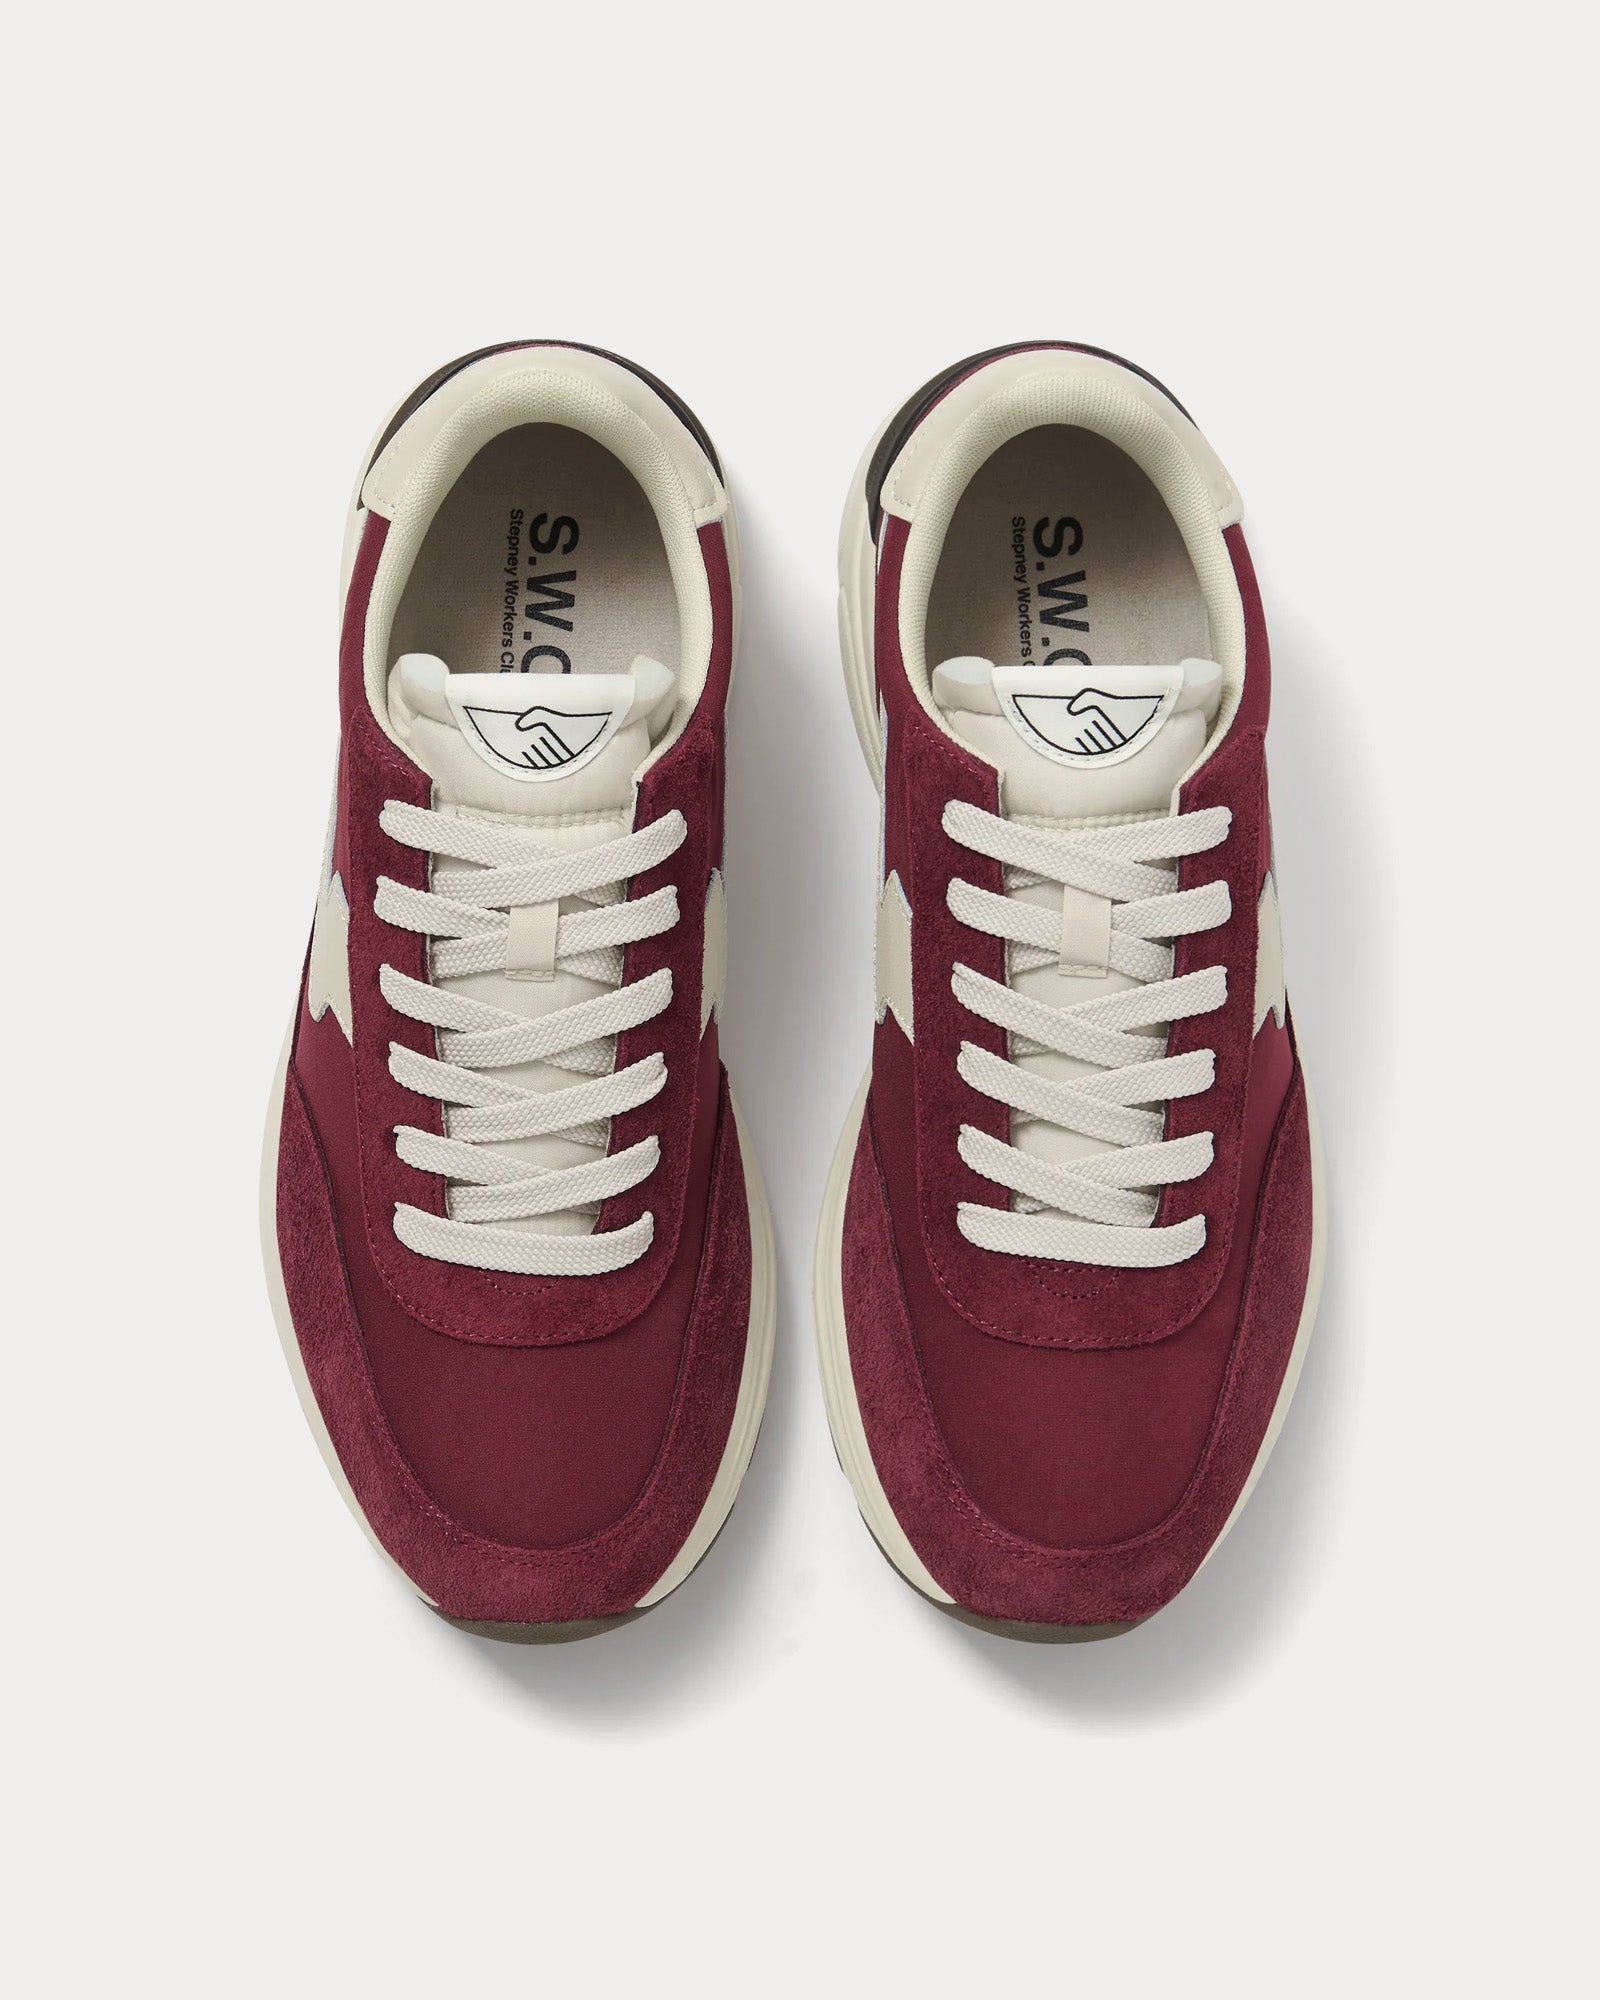 Stepney Workers Club - Osier S-Strike Suede Mix College Red Low Top Sneakers